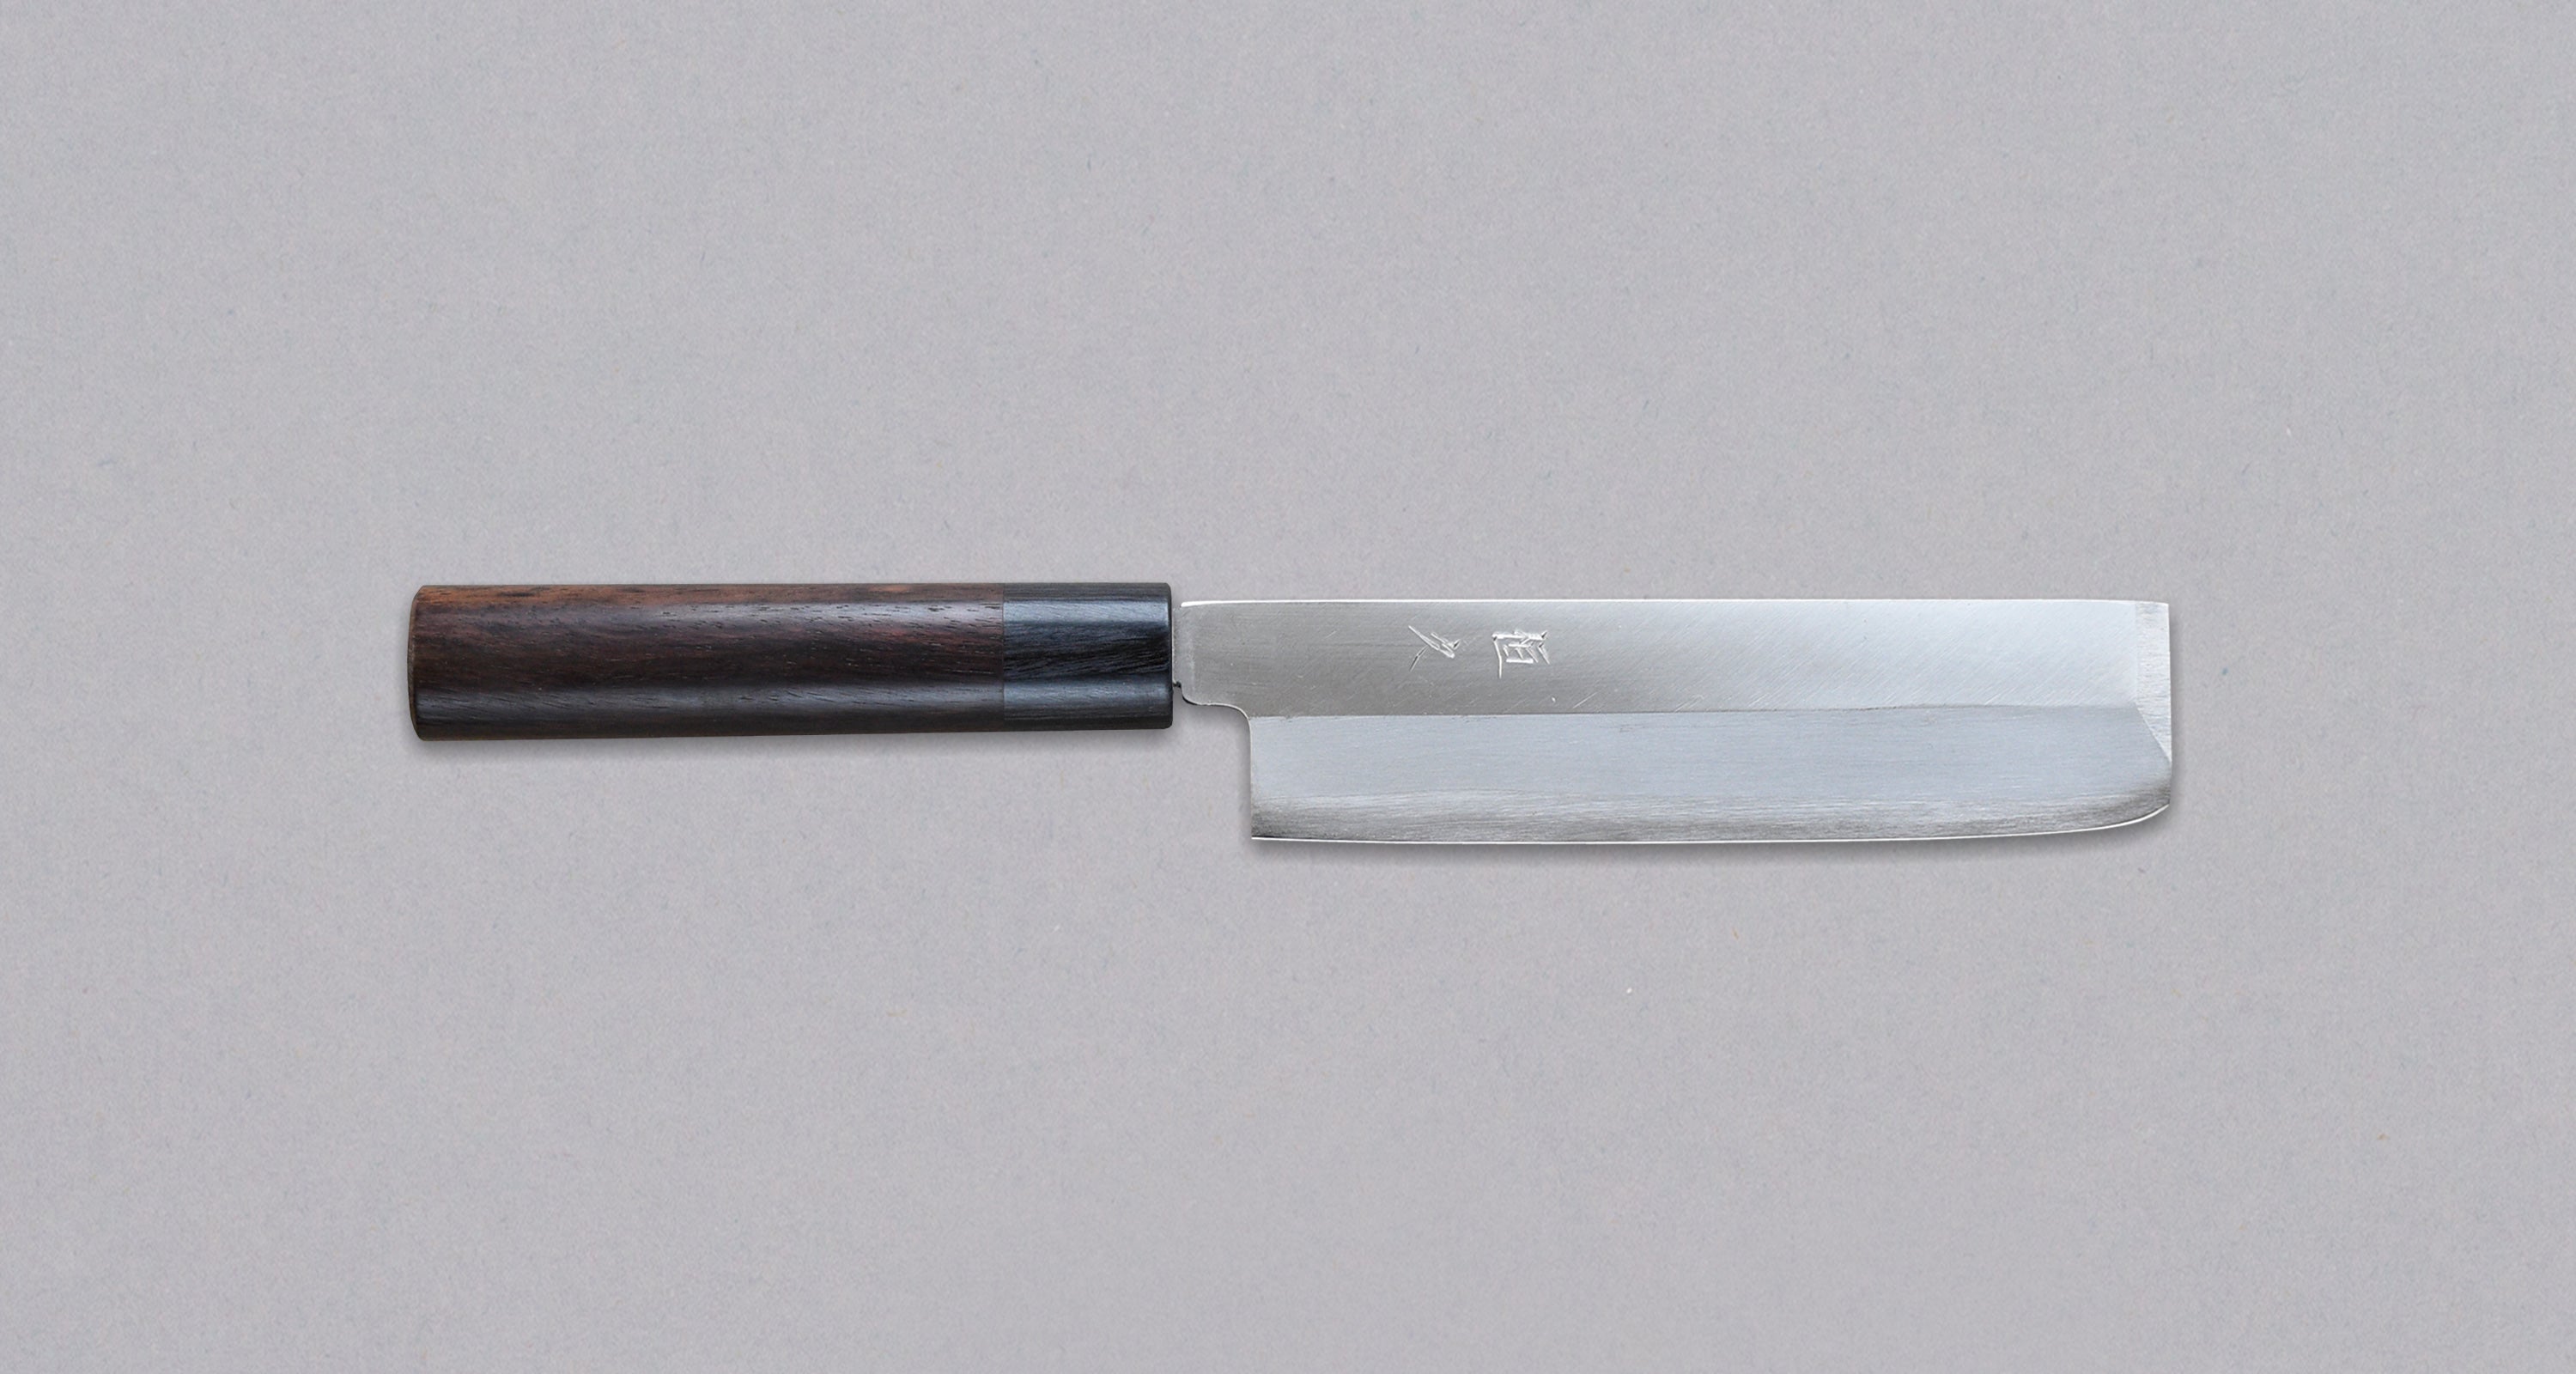 What are Japanese knife handles made of? – SharpEdge